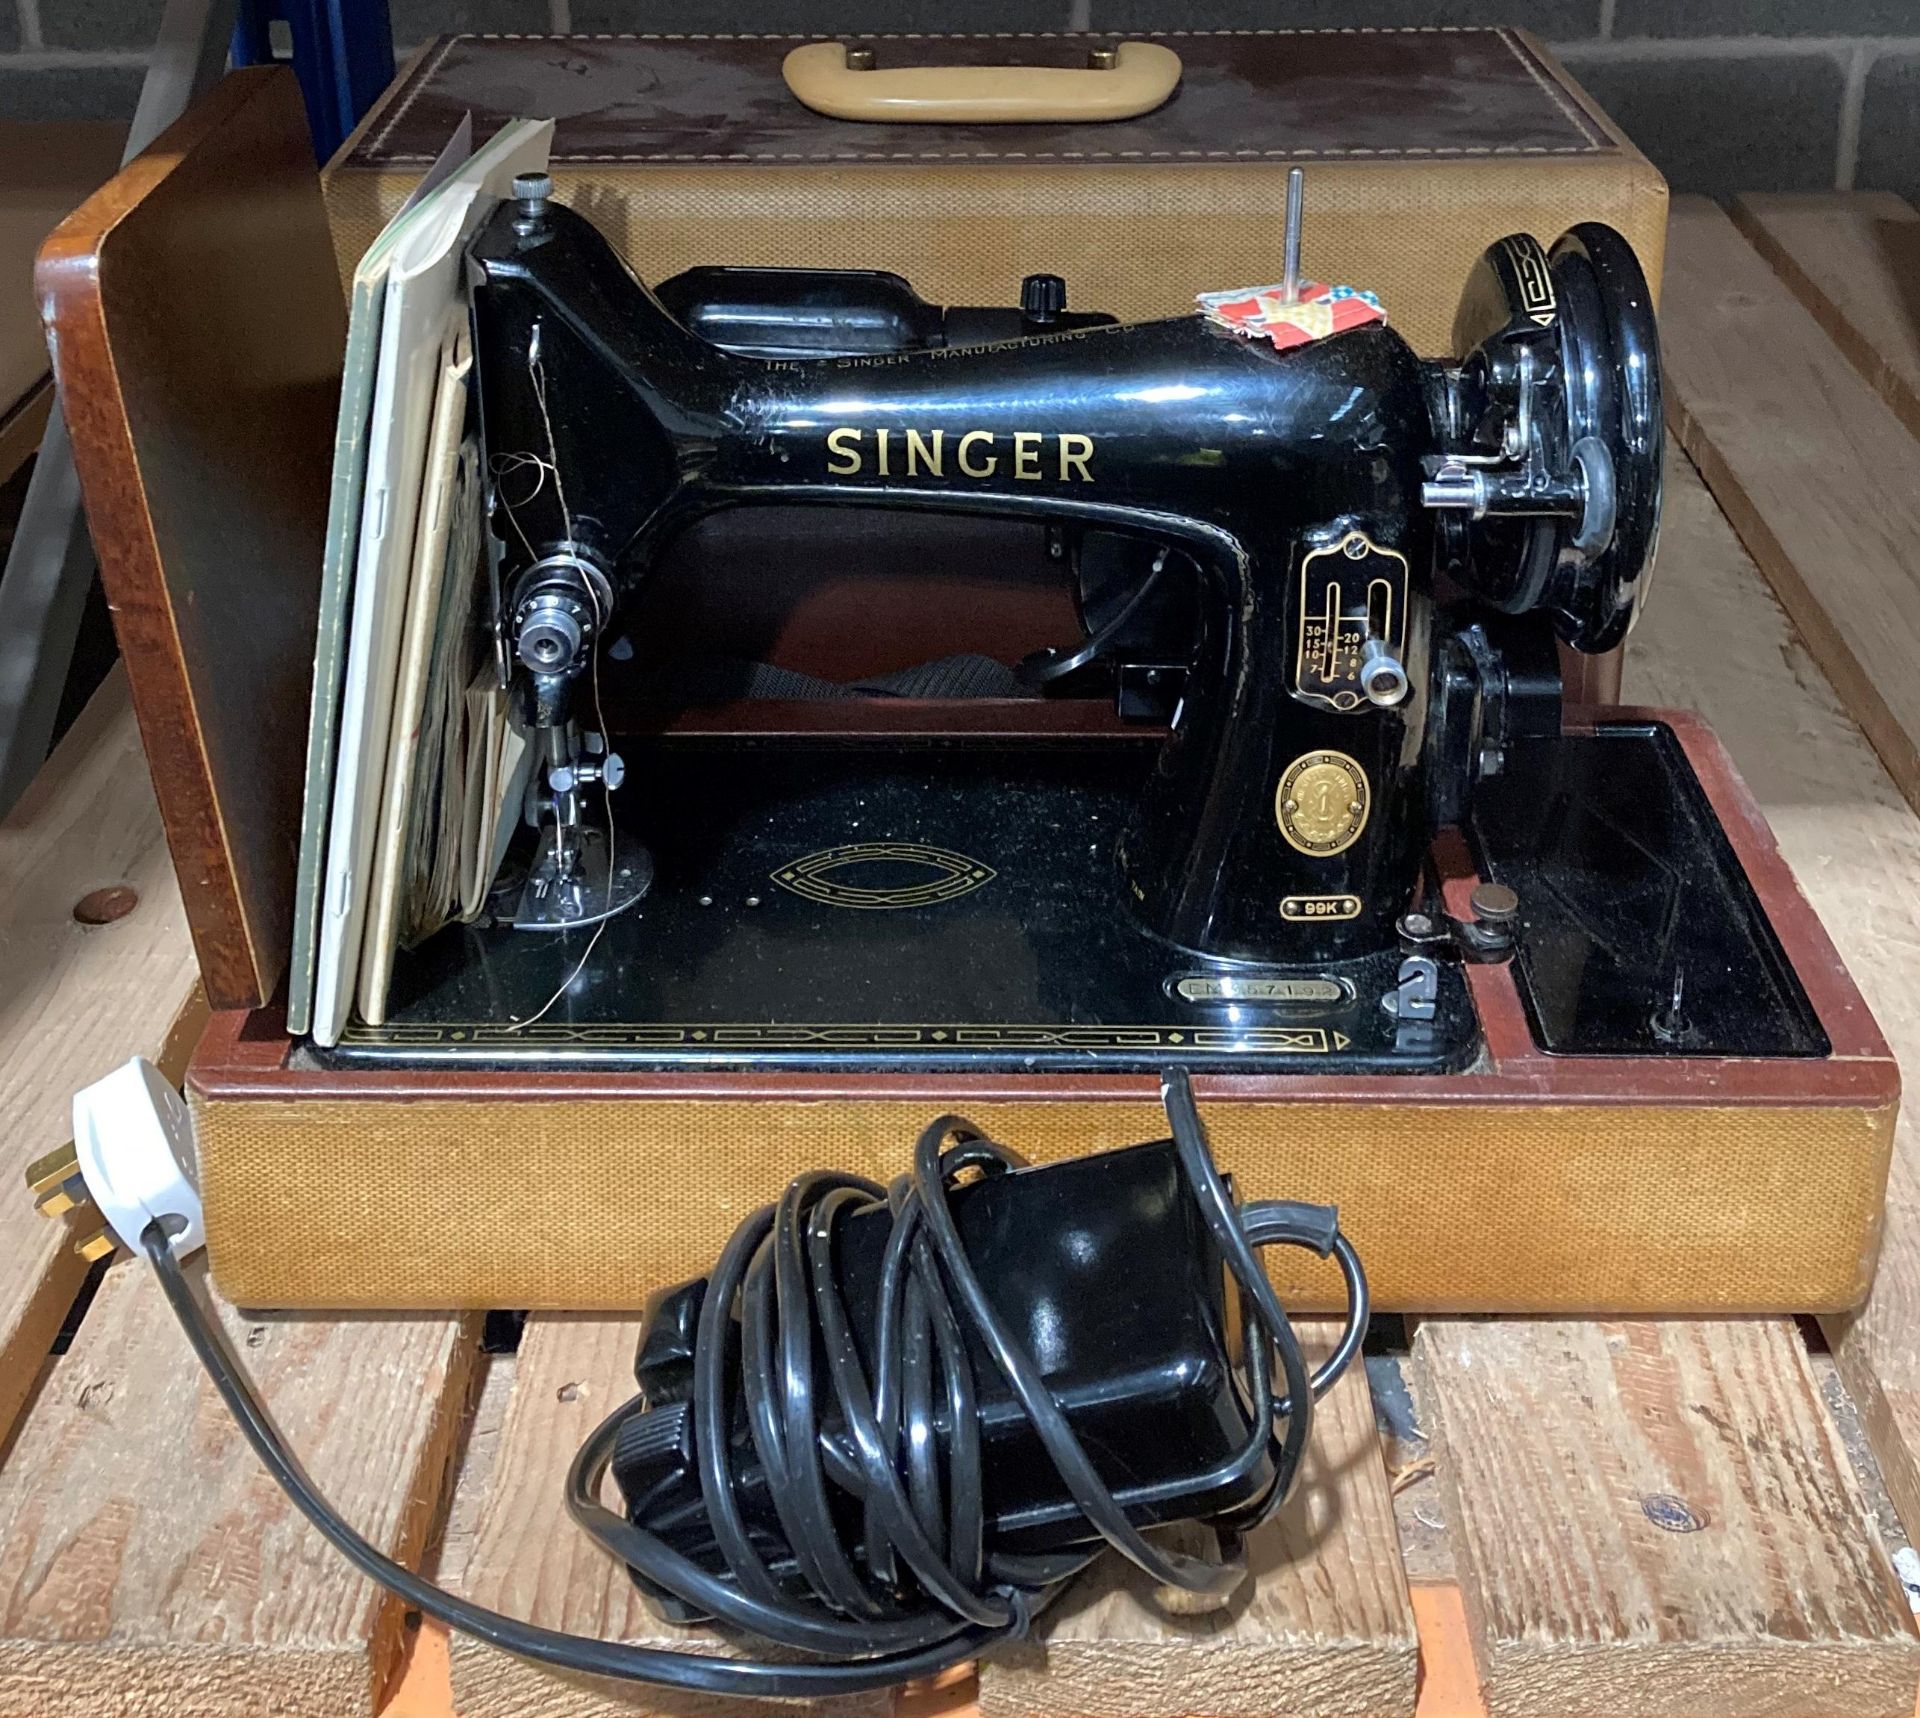 Singer 99K EM357192 foot operated sewing machine complete with pedal,